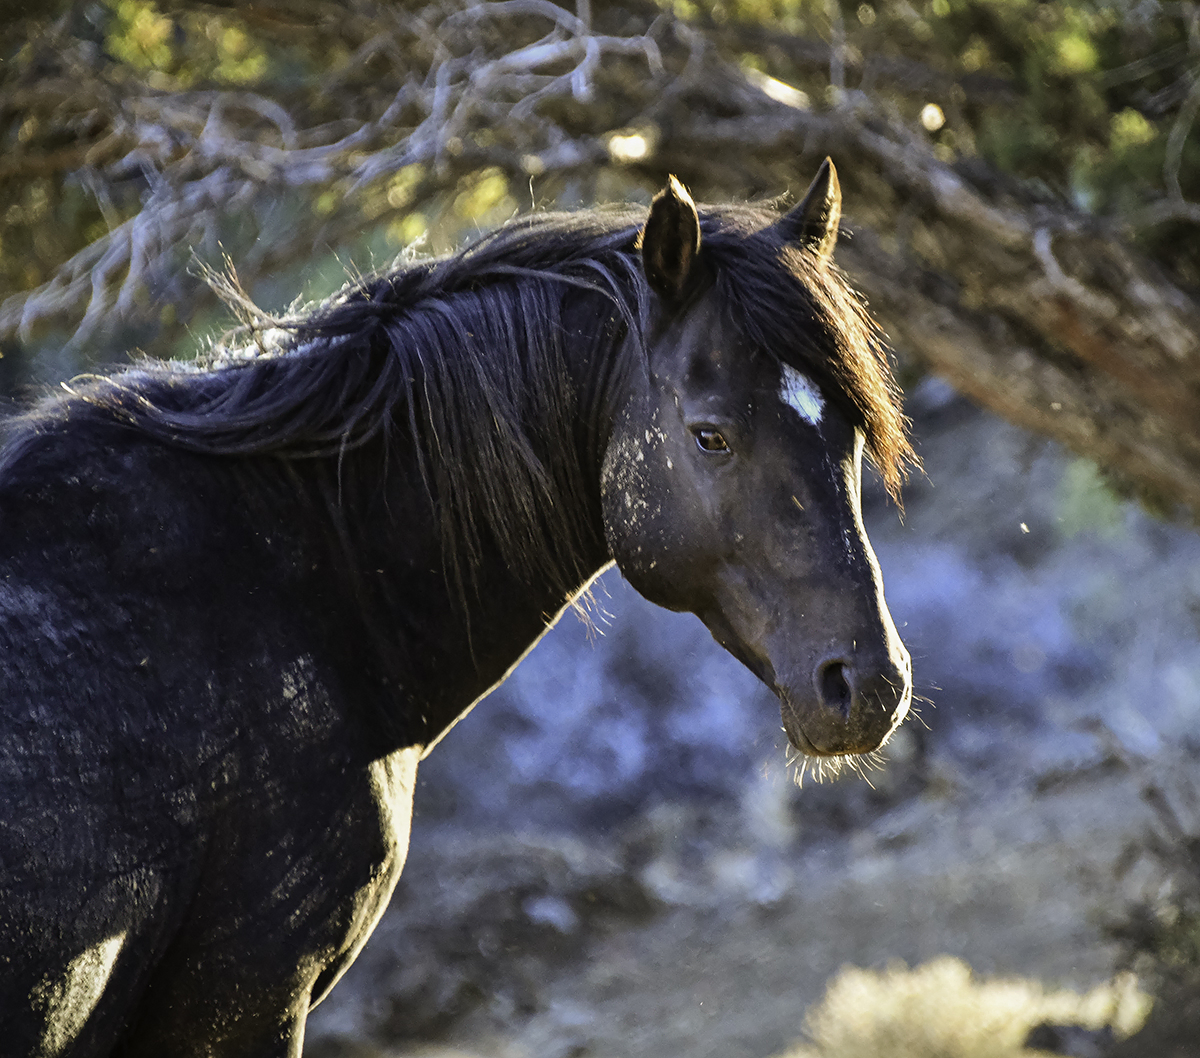 A black horse looks at the camera.